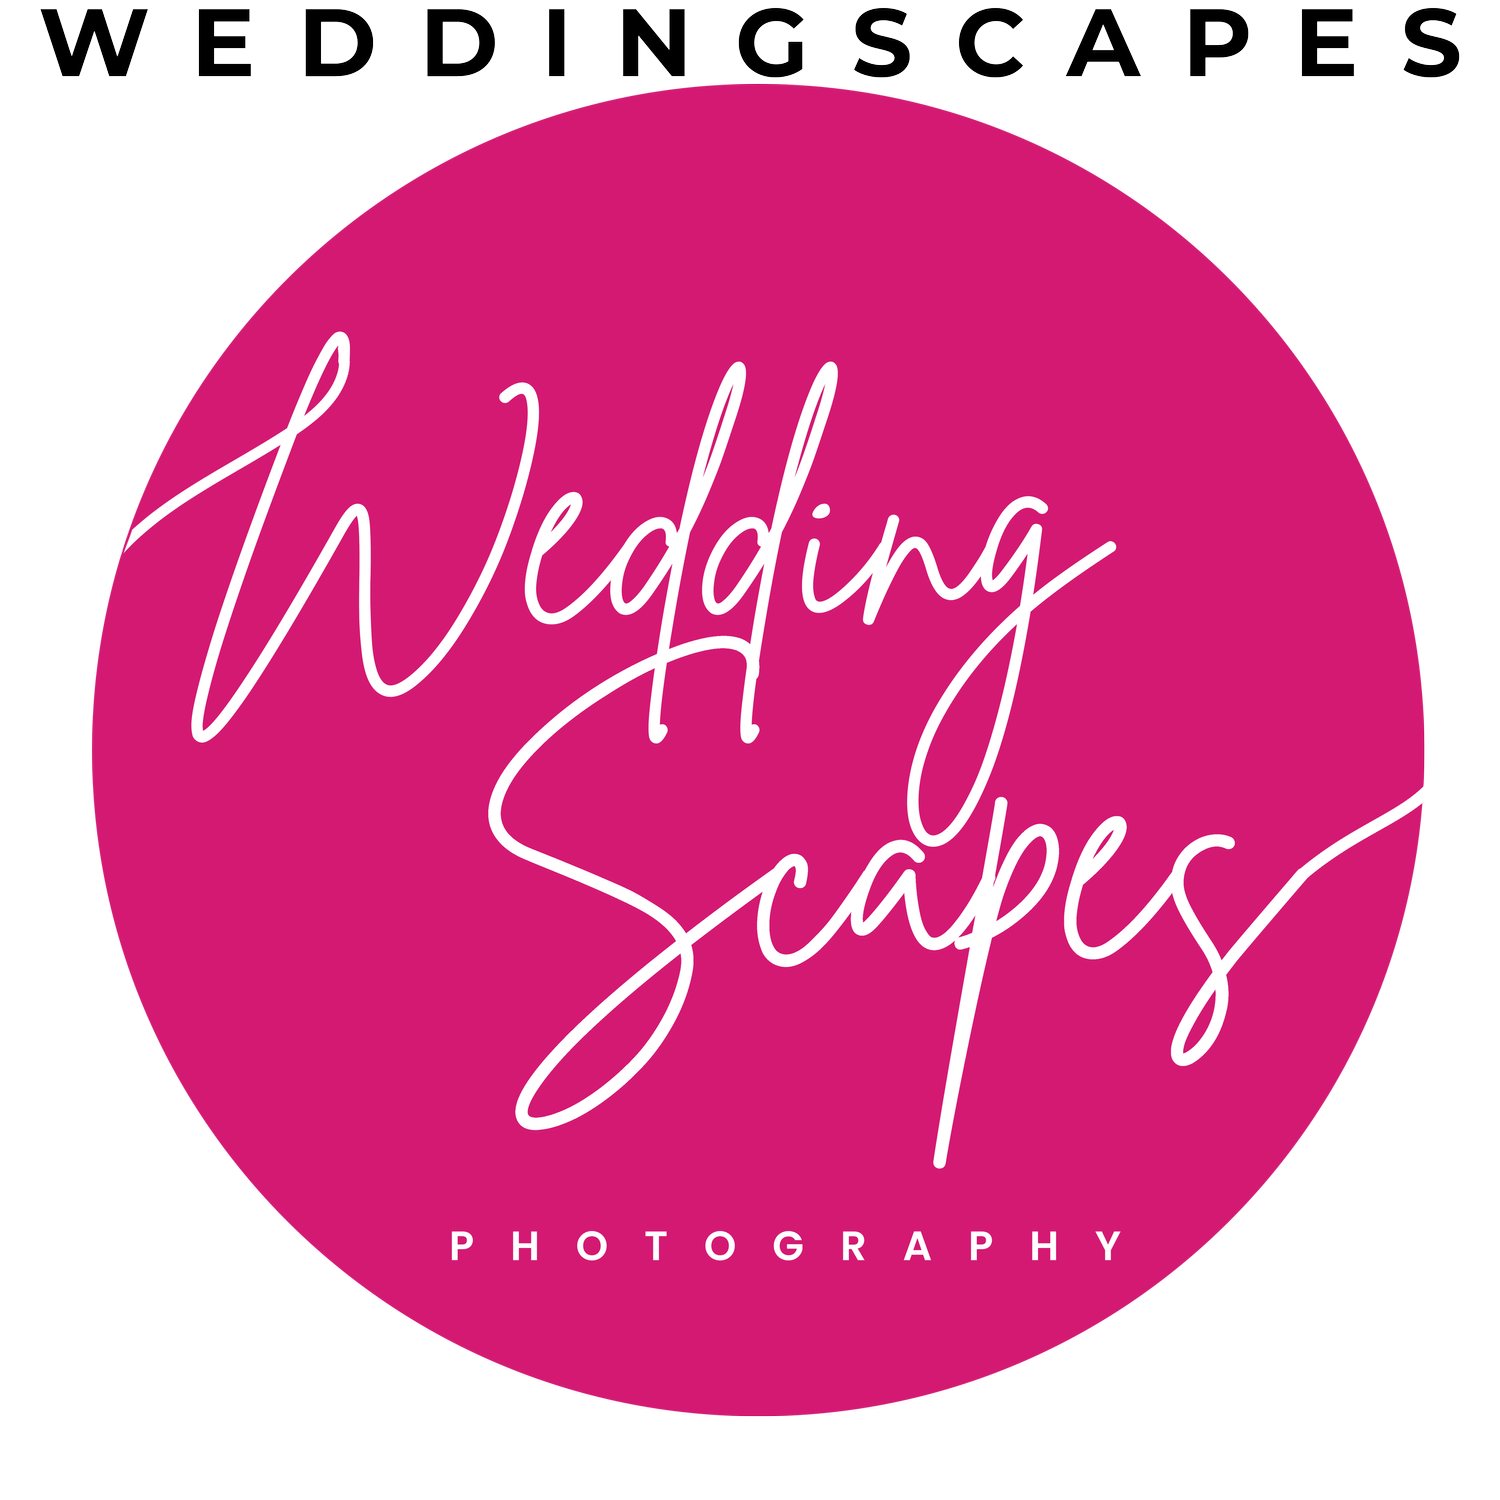 WEDDINGSCAPES - BEST WEDDING PHOTOGRAPHERS IN HYDERABAD